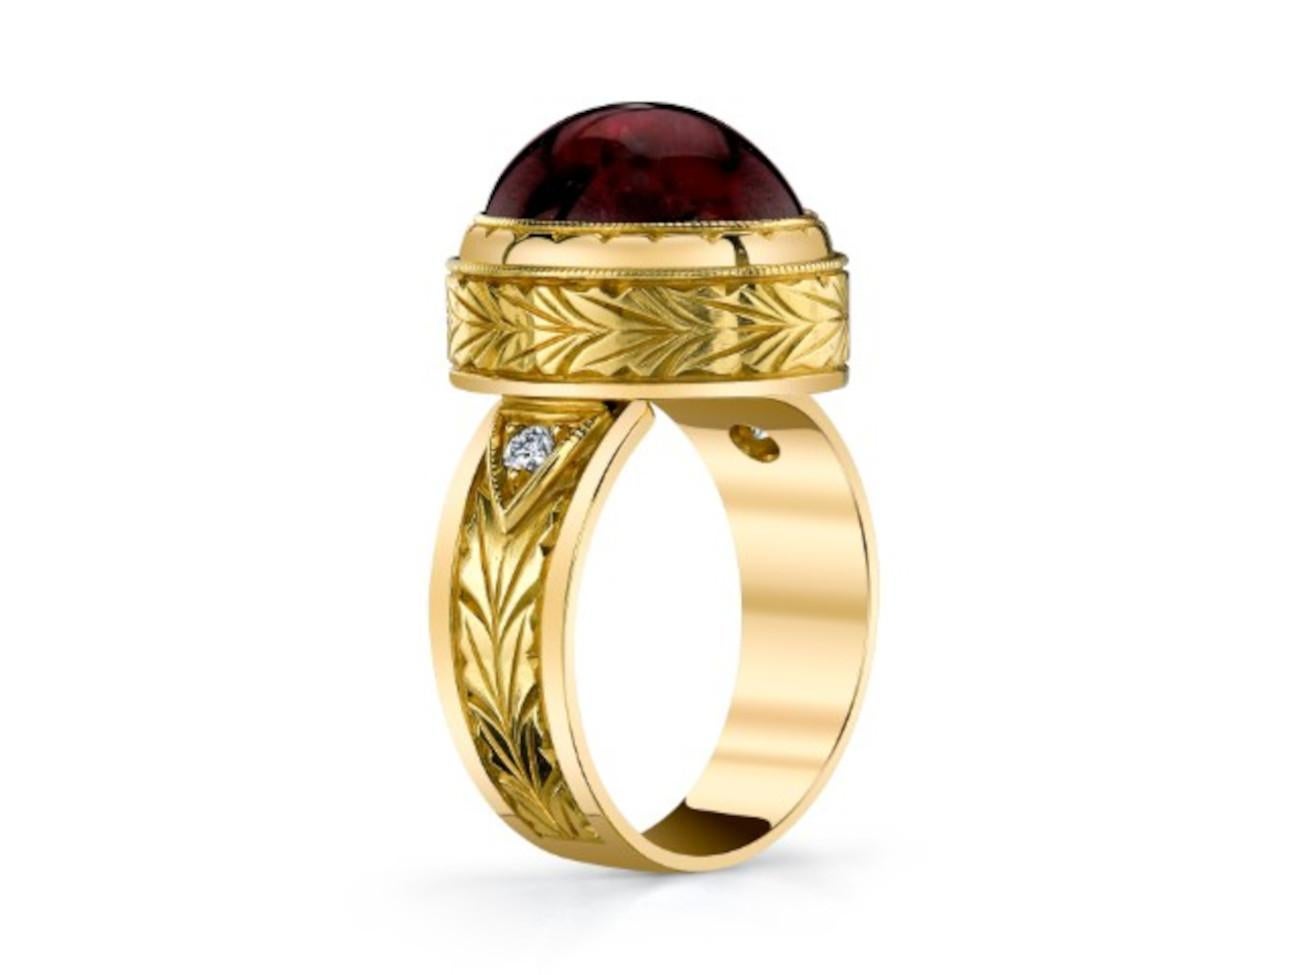 This 18k yellow gold handmade ring features a beautifully crystalline rubellite tourmaline cabochon with gorgeous raspberry color and excellent clarity. Our signature ring style was designed to showcase a main gemstone of noteworthy quality by